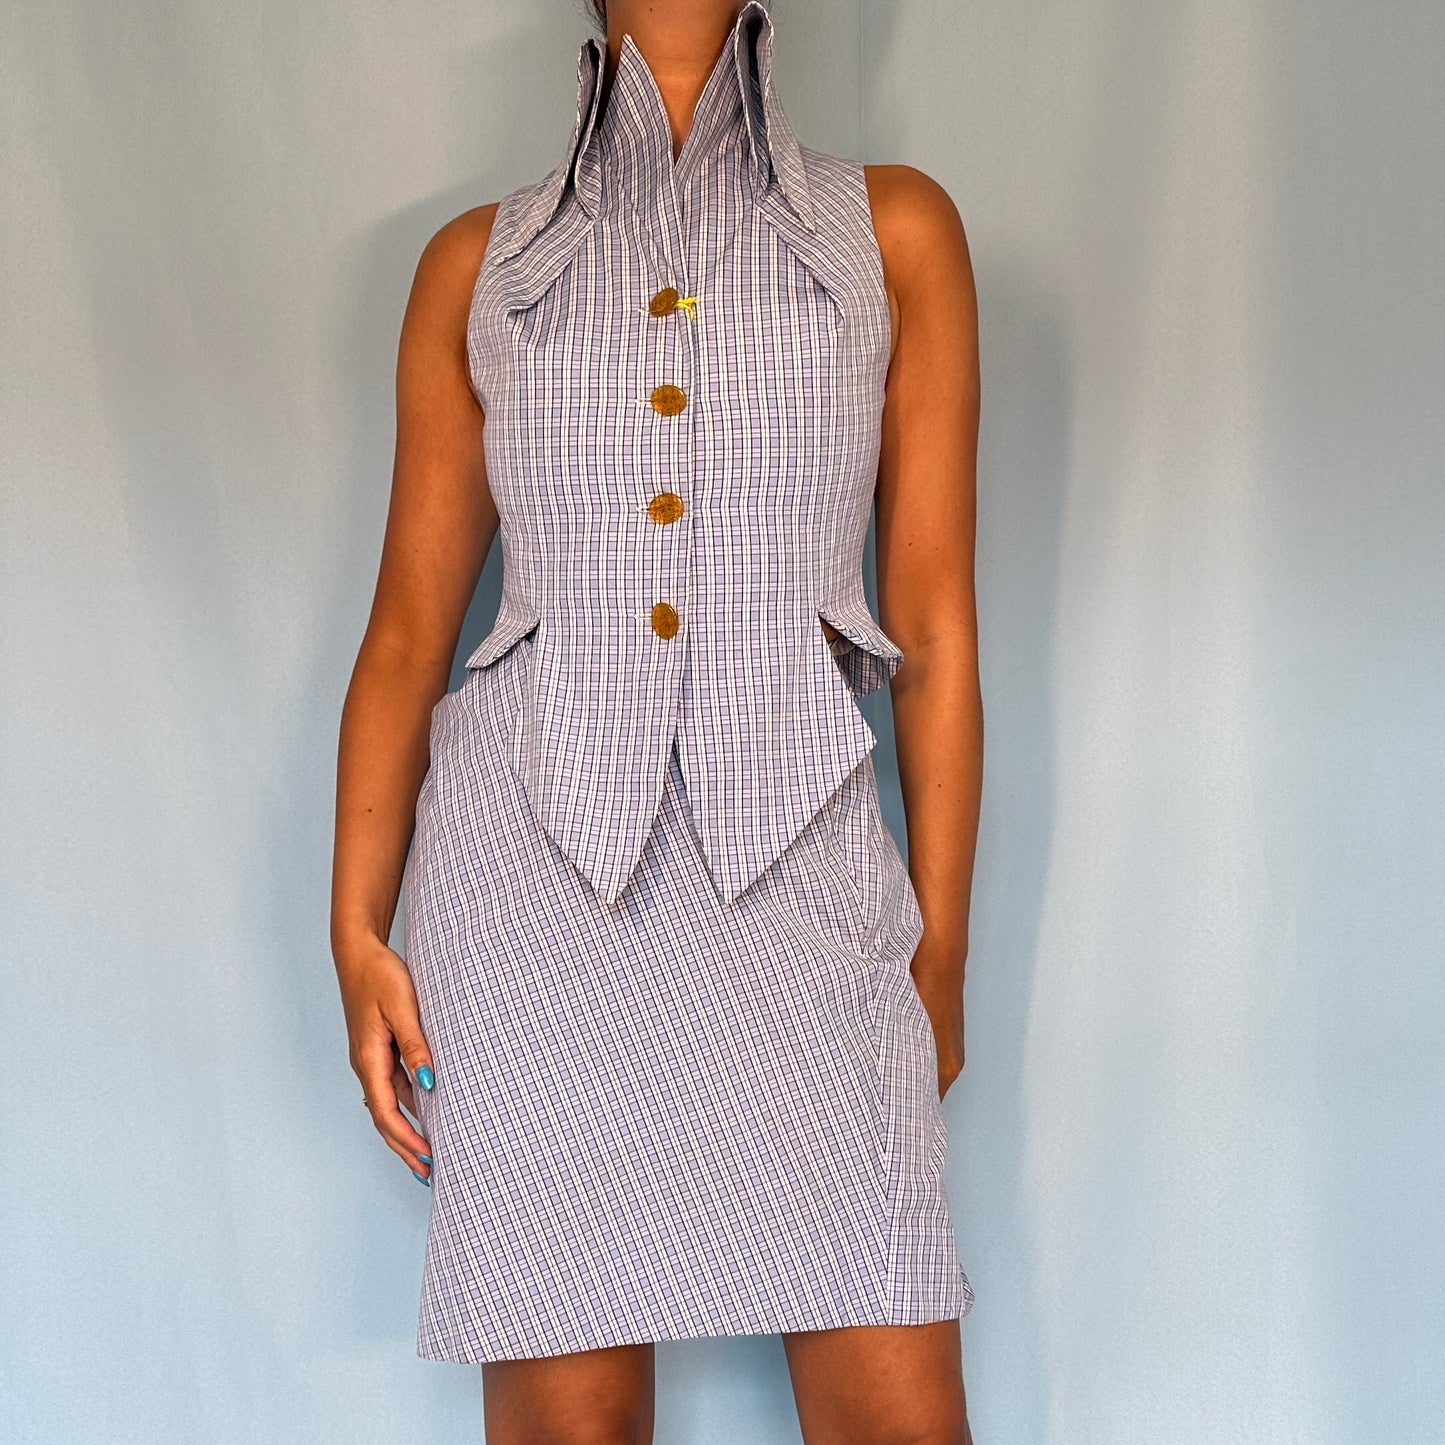 Vivienne Westwood Spring 1994 “Cafe Society” Checked Bustle Skirt & Waistcoat Set